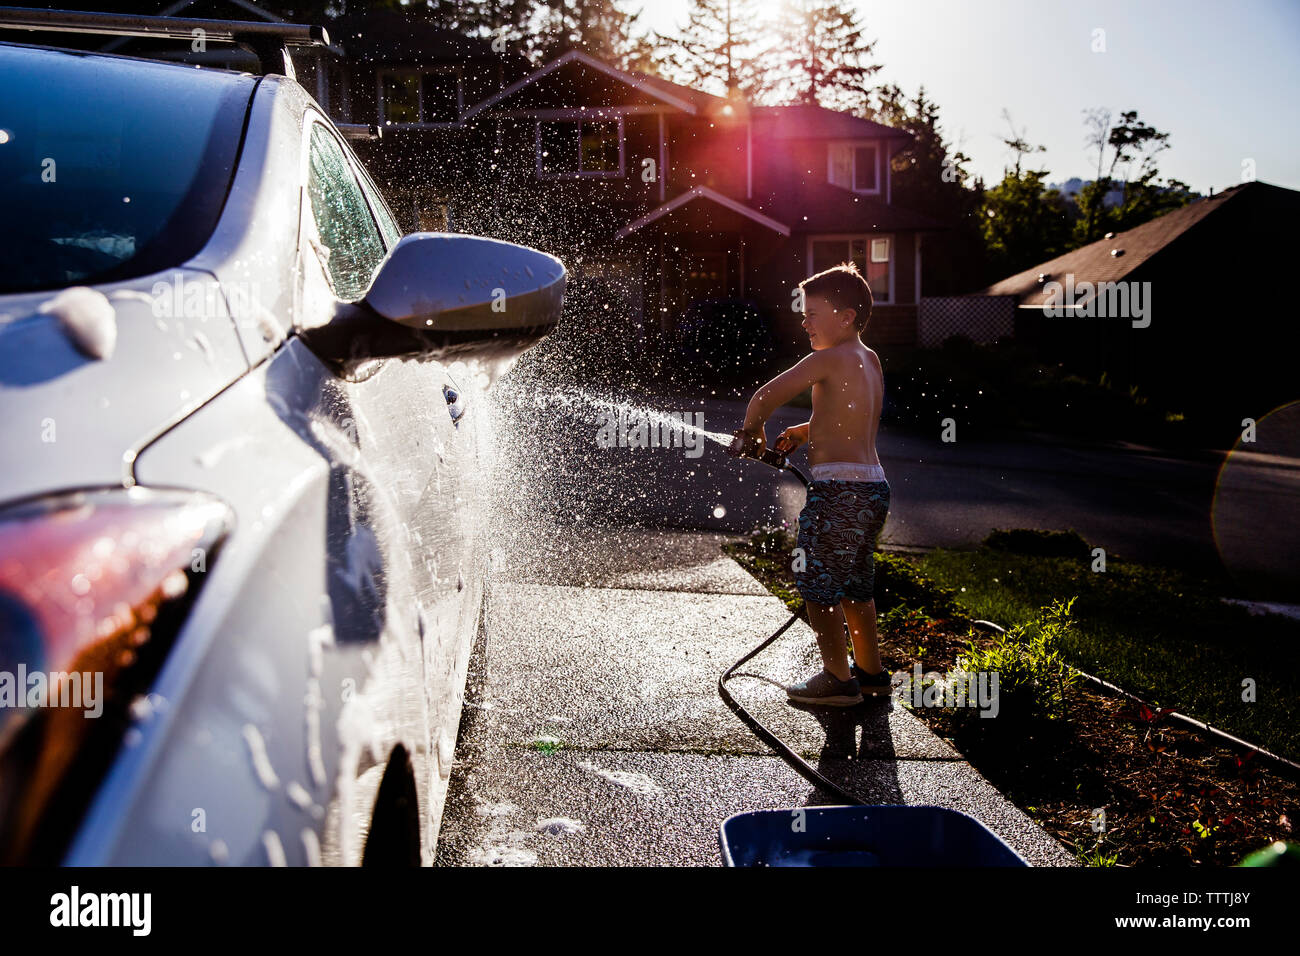 side view of boy washing car with hose Stock Photo